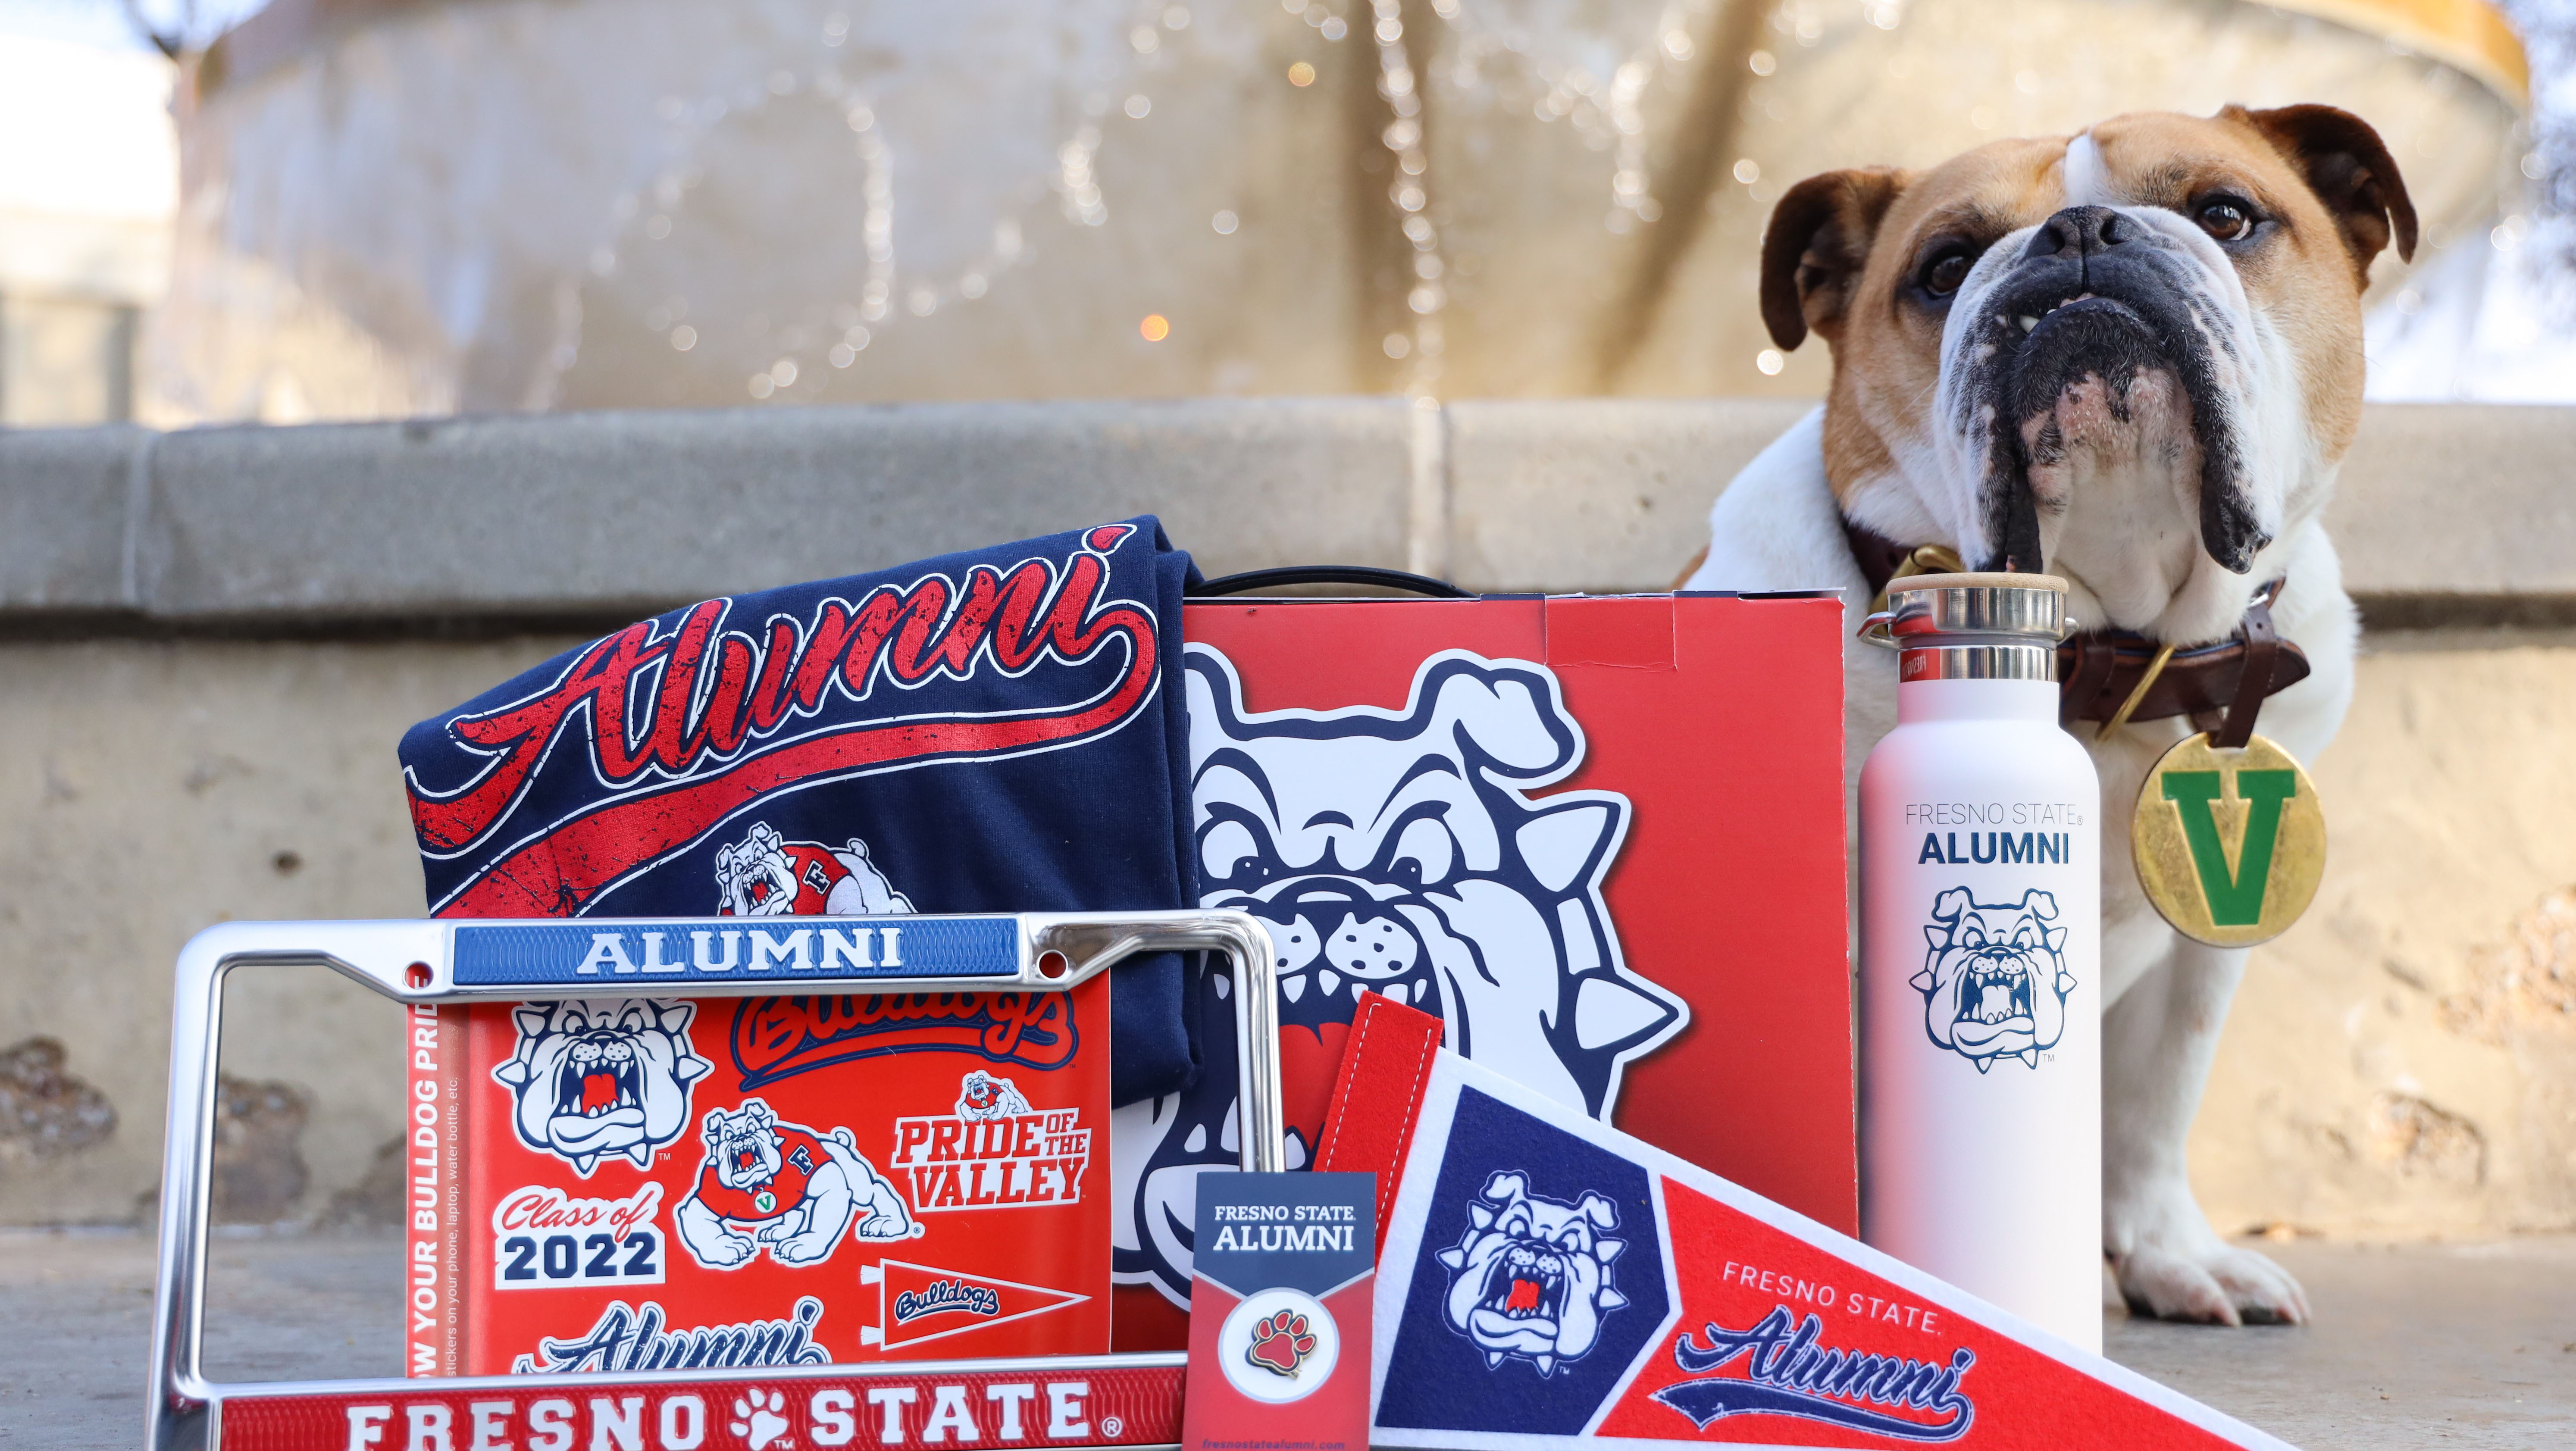 Victor E. Bulldog III at the fountain surrounded by graduation gifts: alumni t-shirt, license plate frame, water bottle, banner and stickers